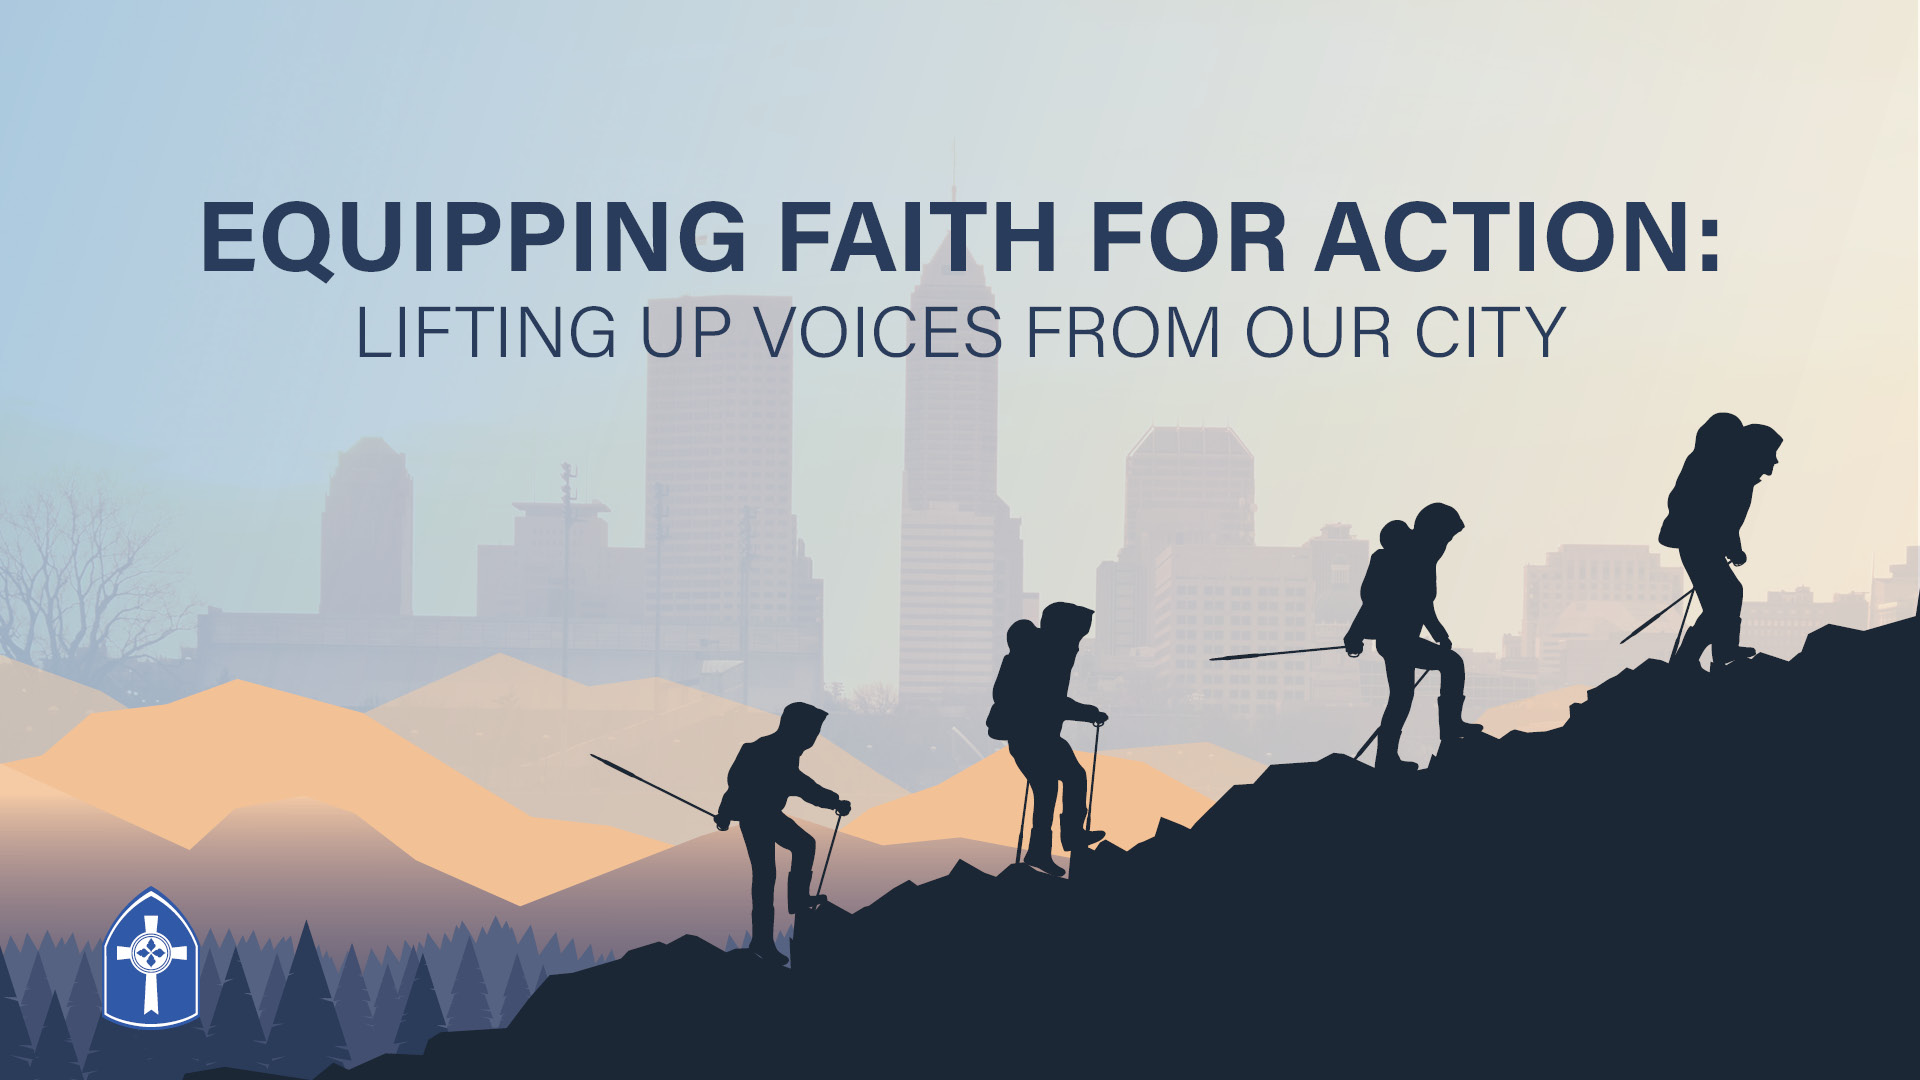 Equipping Faith for Action: Black Maternal Health
Sundays, 9:30 a.m., Room 356

We lift up voices from around our city discussing this important health crisis. 
